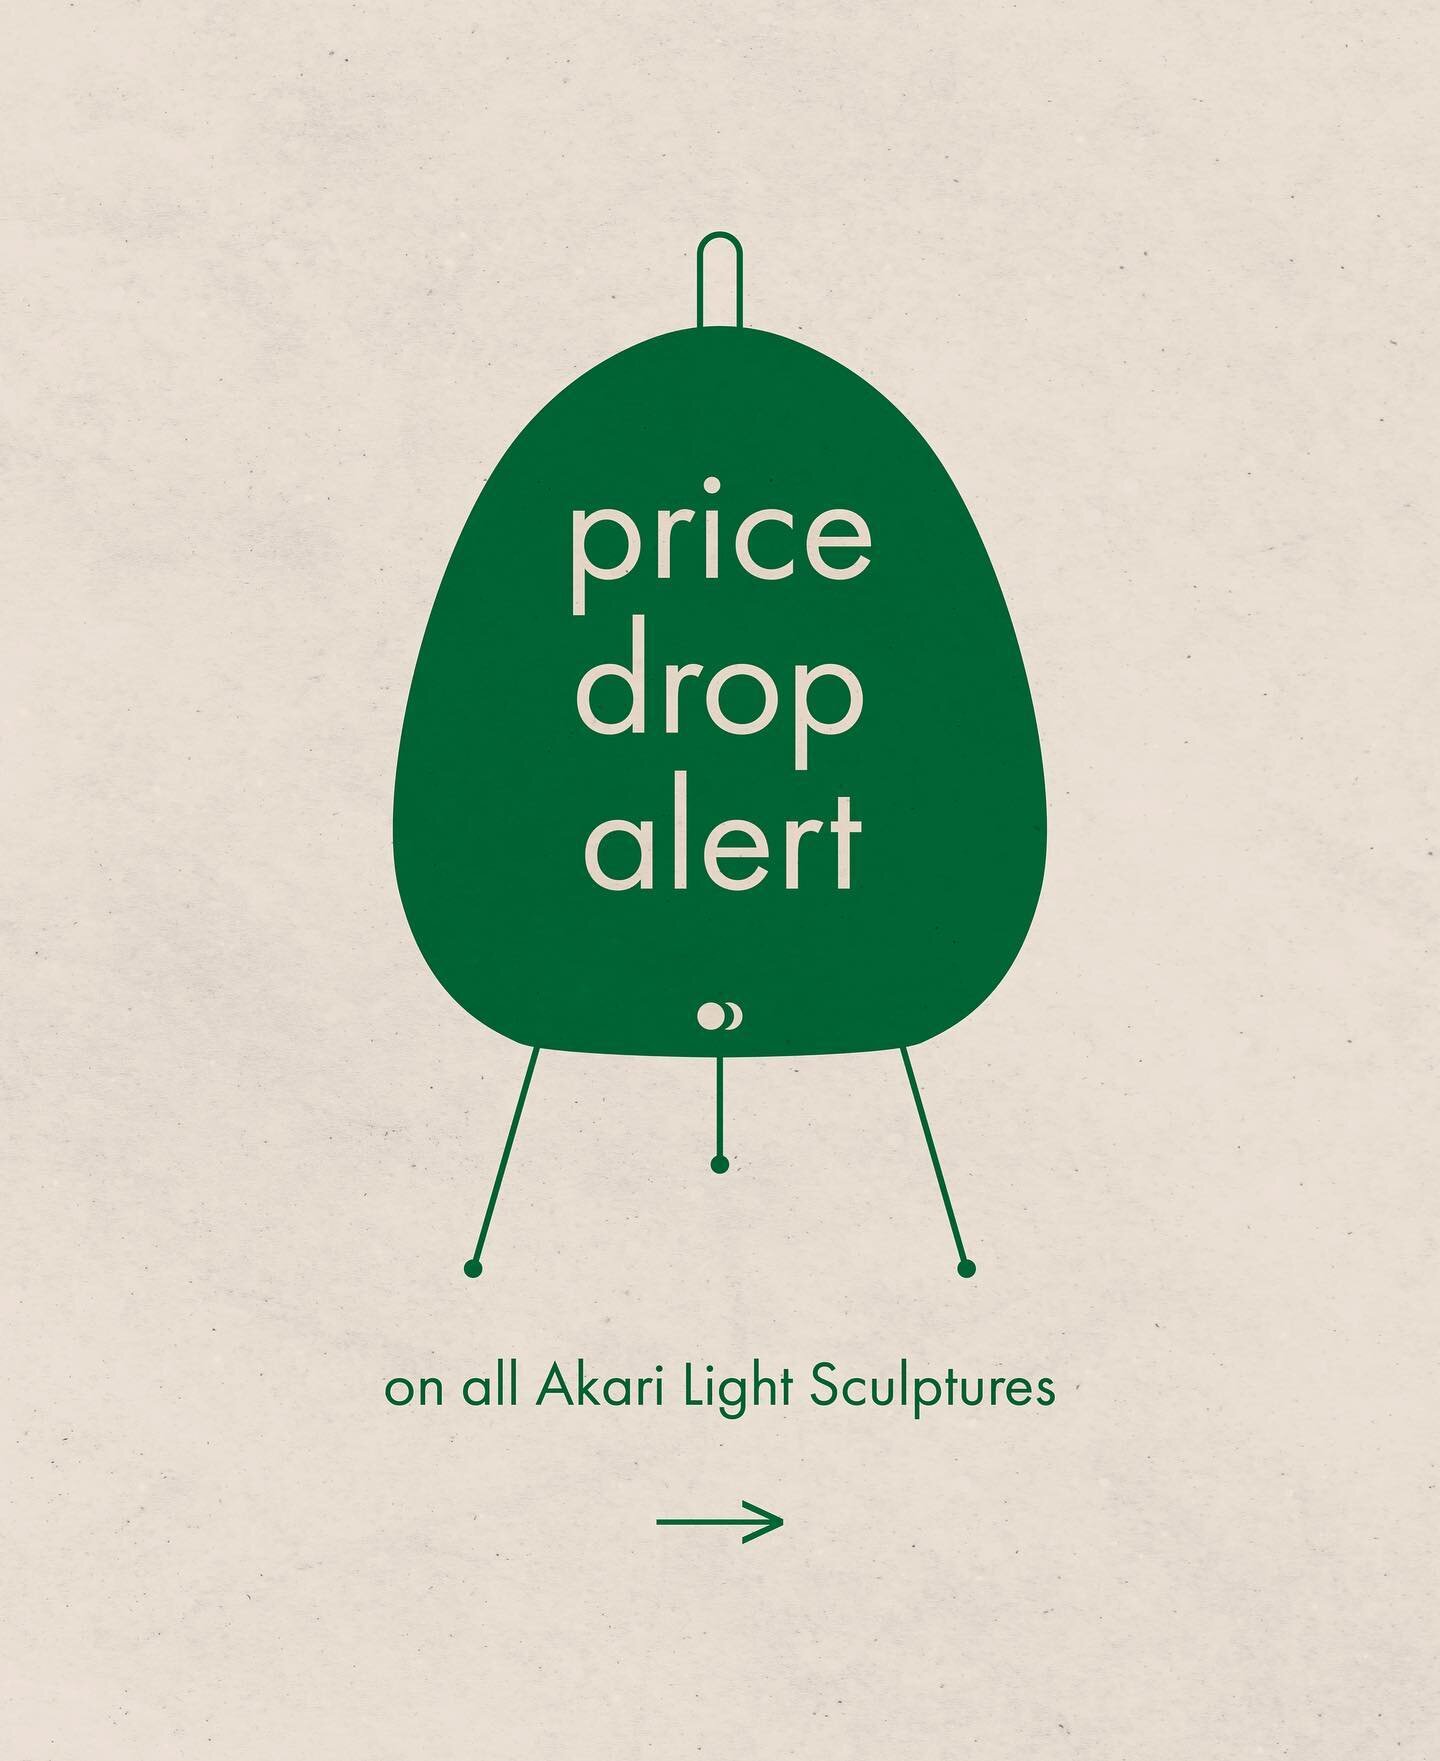 Price drop alert! Some of our favorite Akari Light Sculptures are back in stock, in new and lower prices! 

Explore the collection online - link in bio.